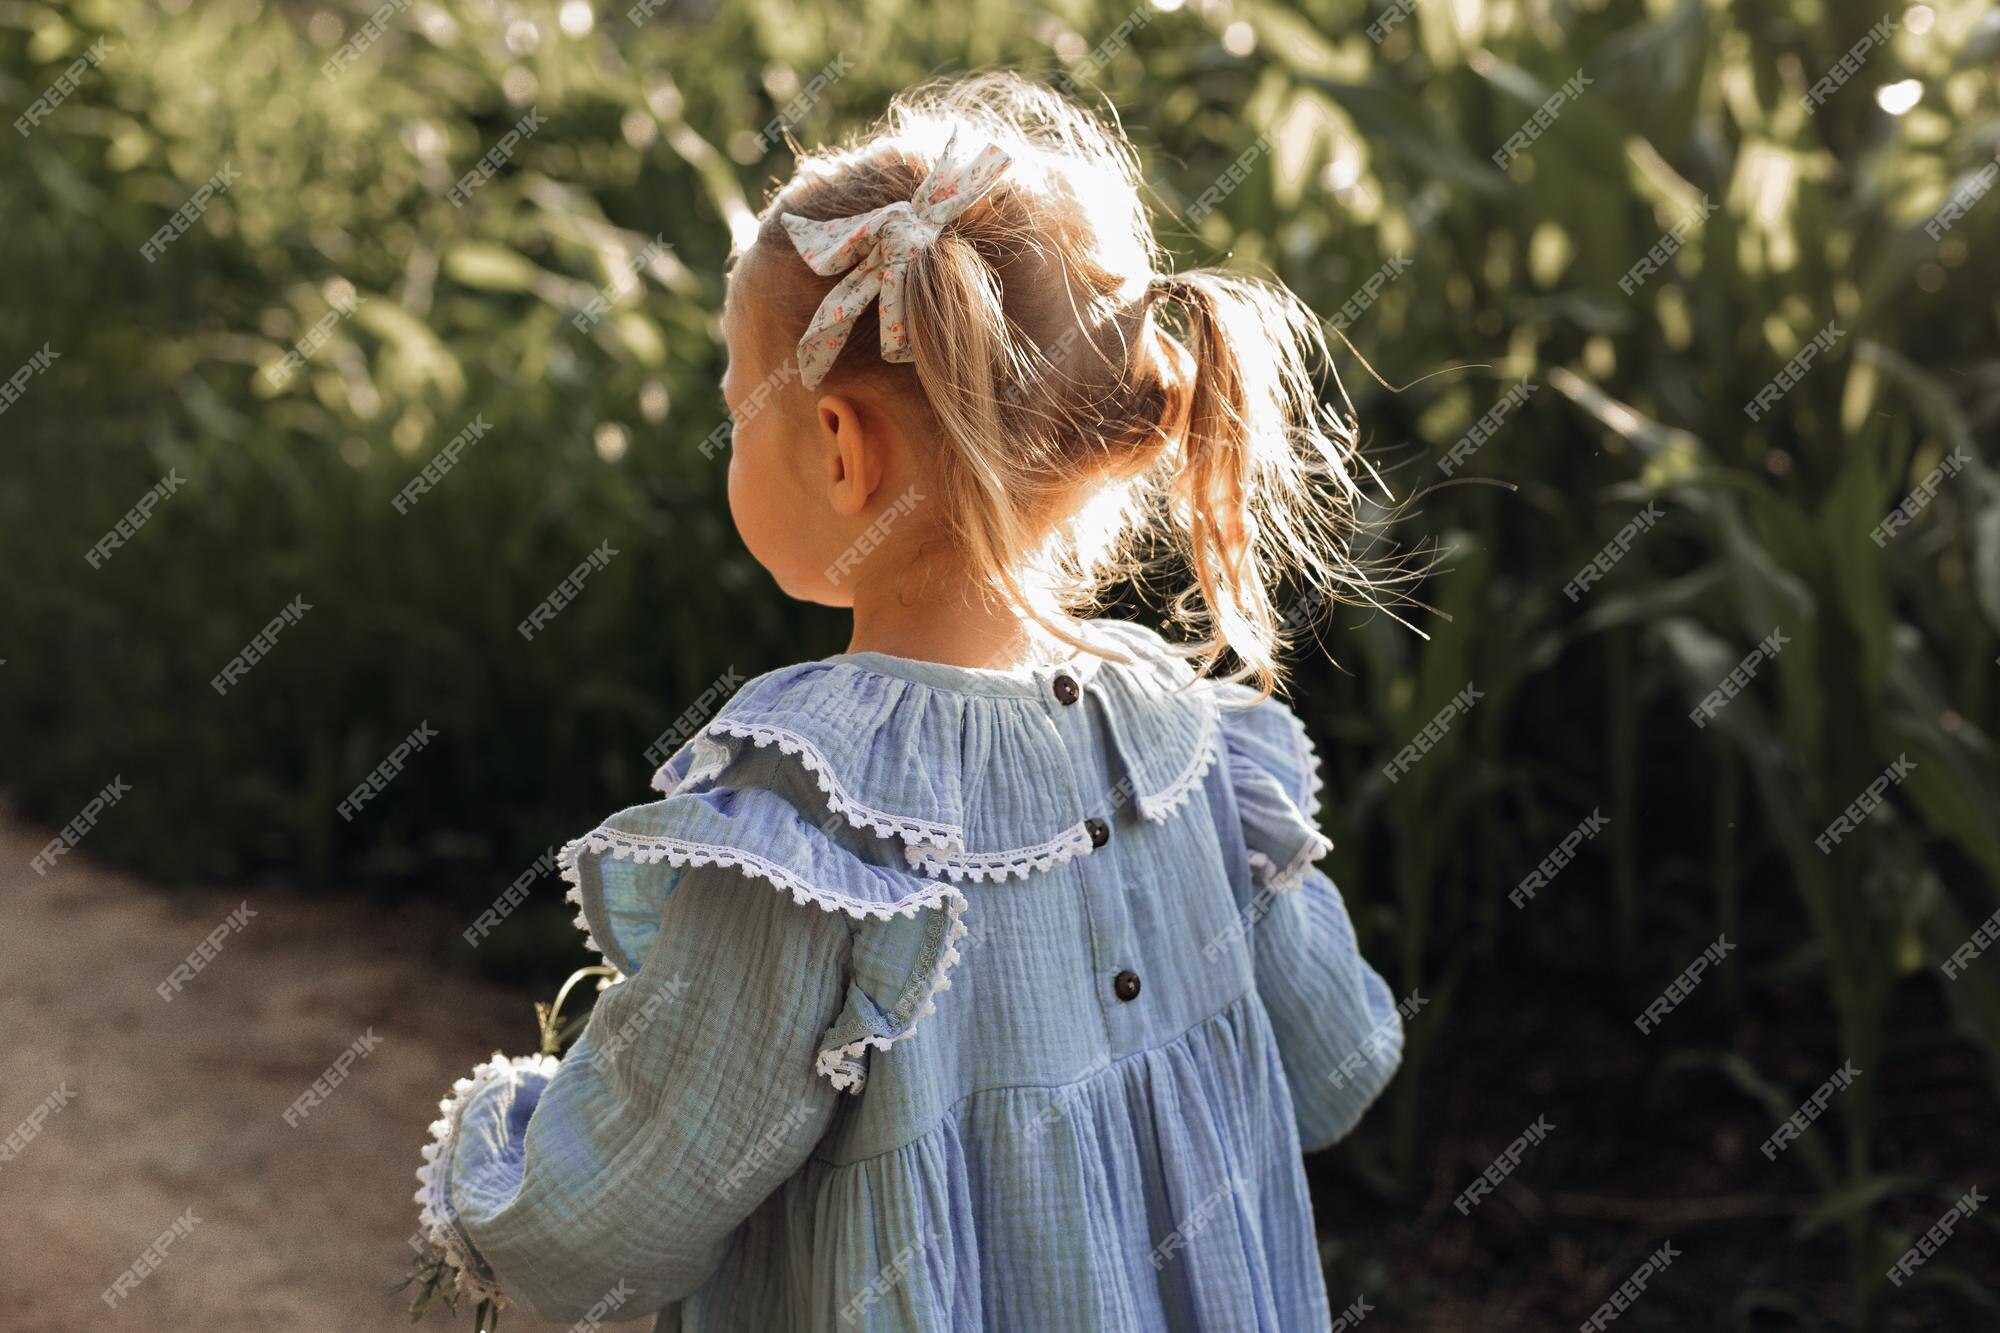 Premium Photo | Girl in blue cotton dress 3 years old walks on field.  children's clothing made of natural materials. happy childhood.  agricultural industry. unity with nature. hairstyle for children with bows.